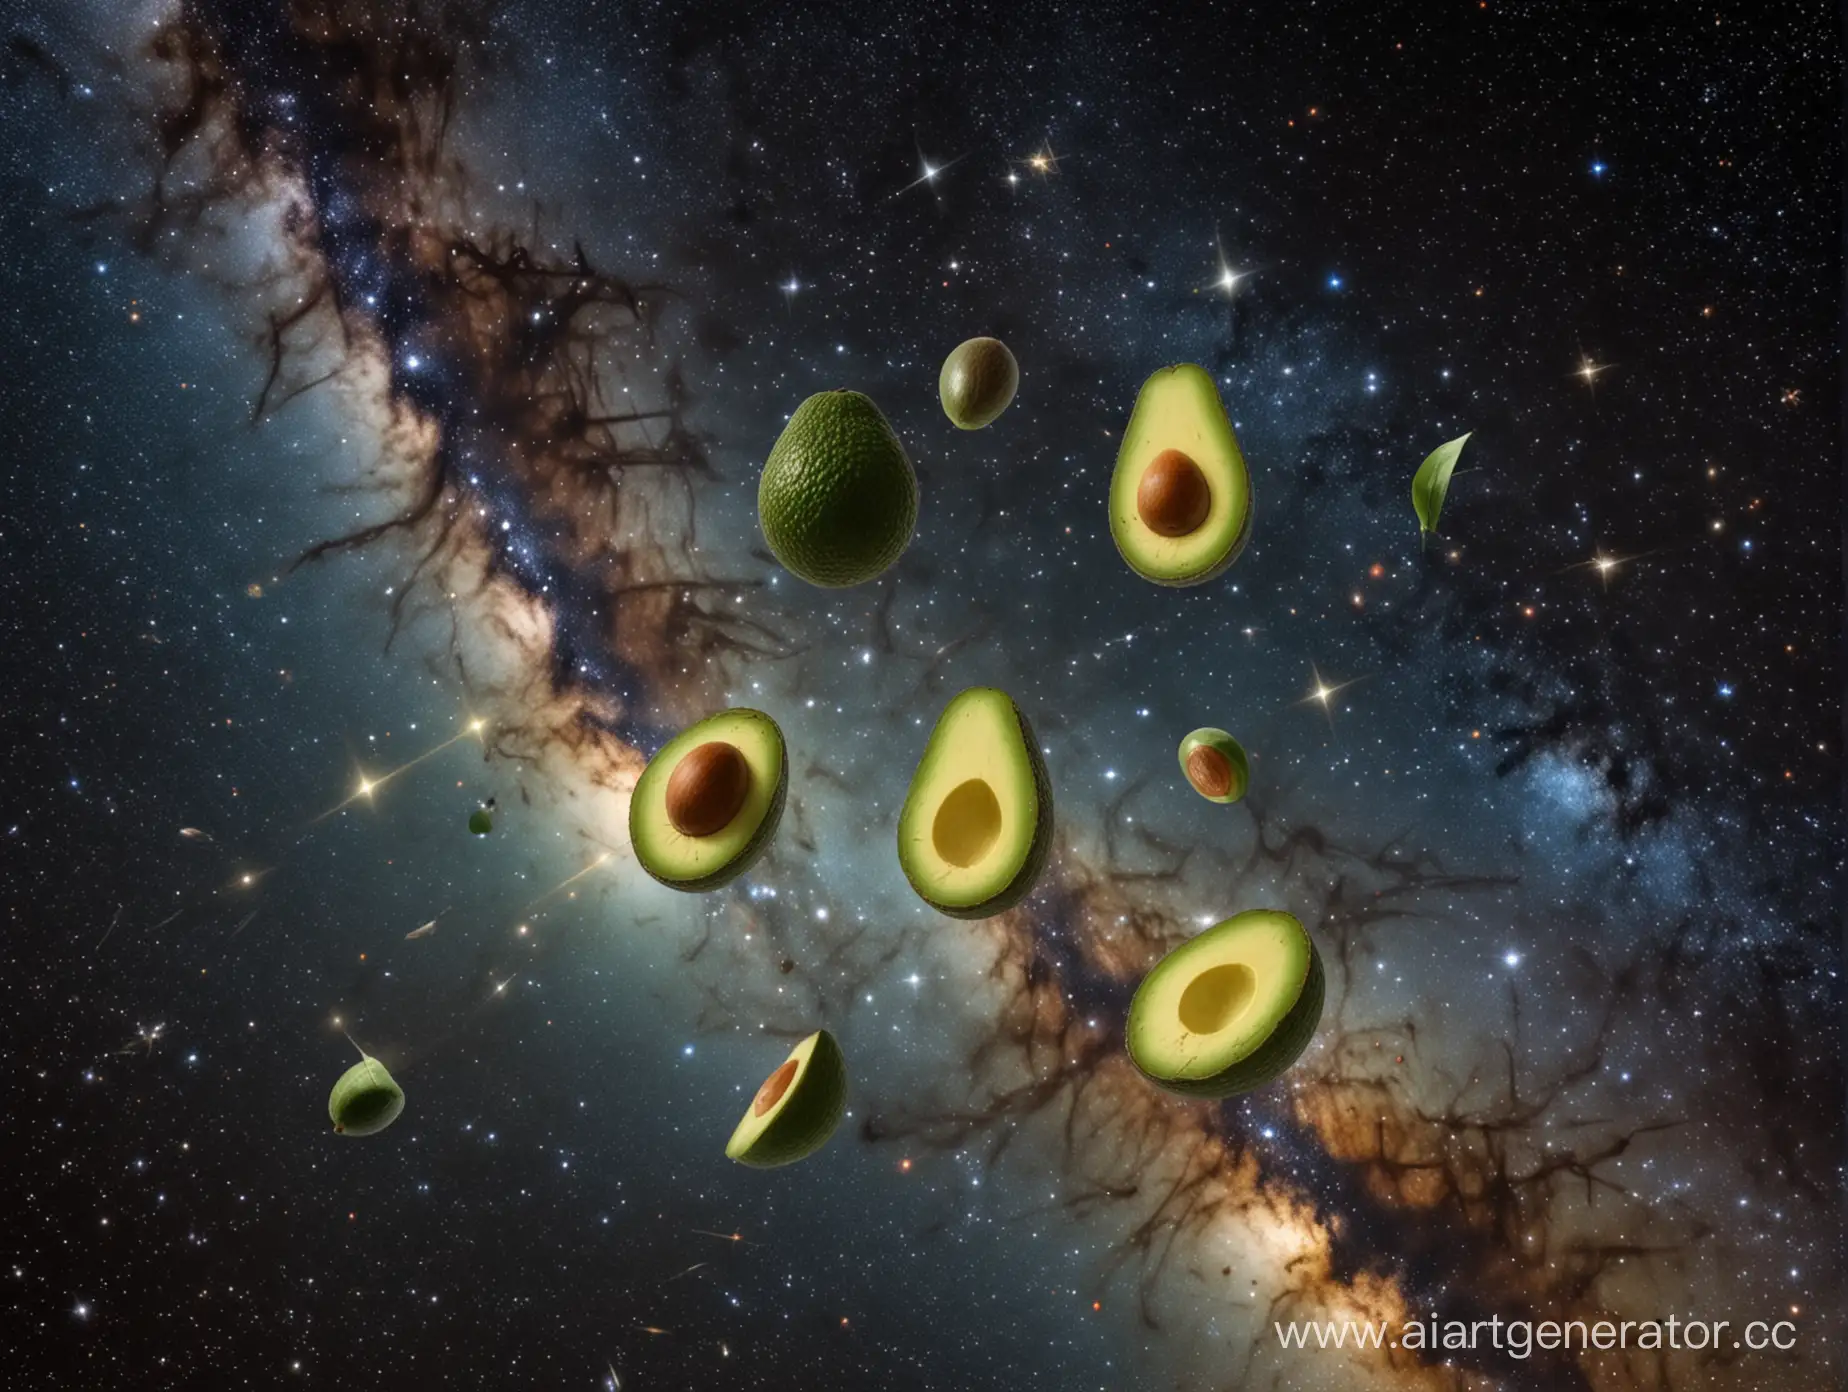 Avocados-in-Space-Free-Flight-Amidst-Stars-and-Quasars